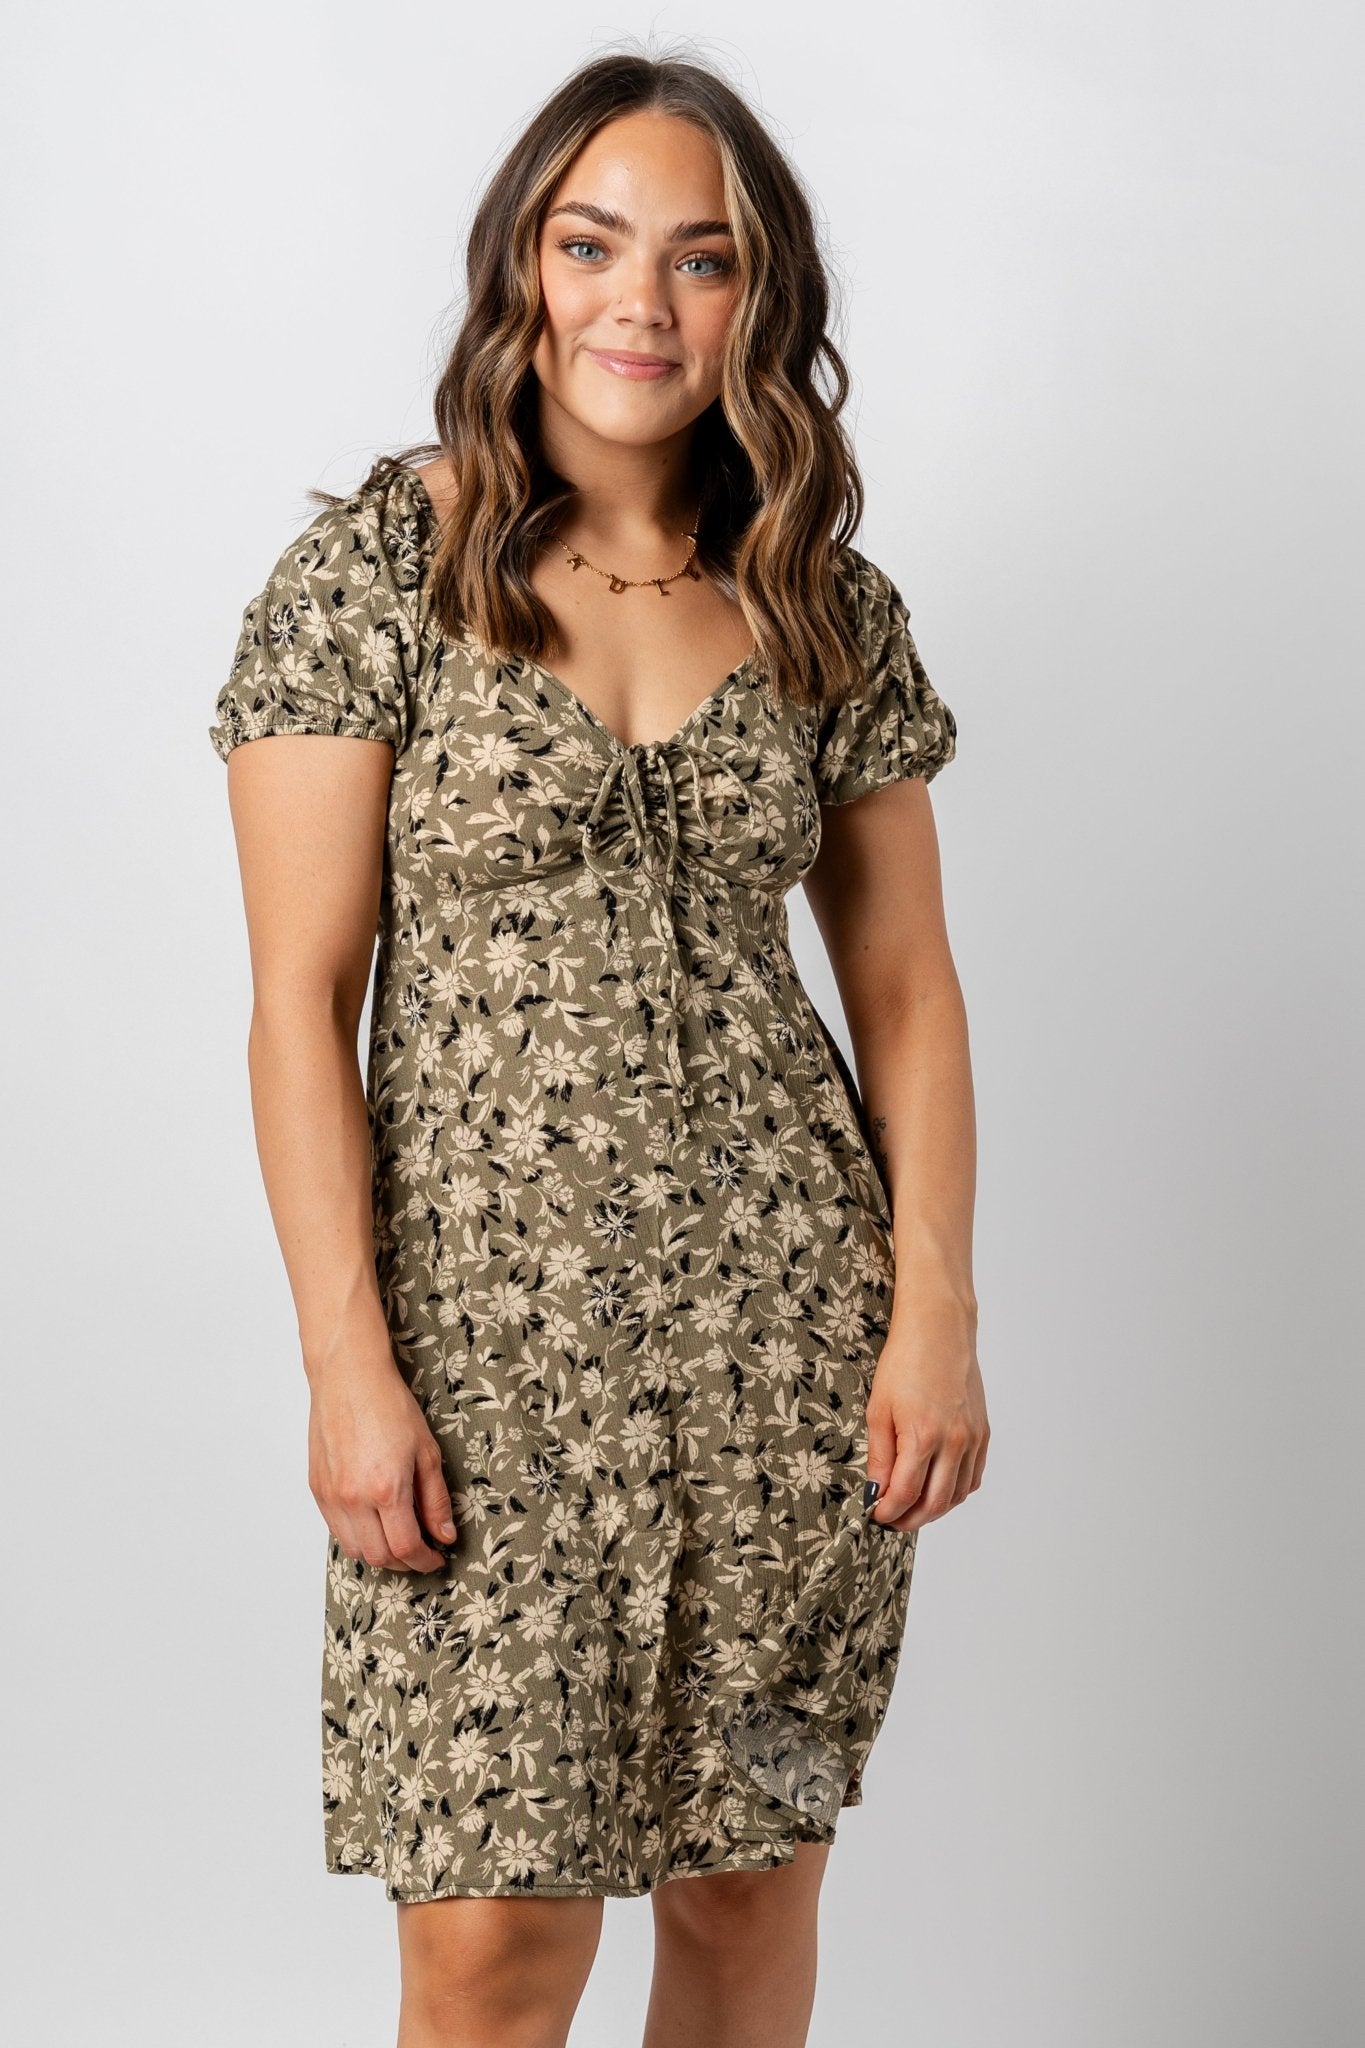 Ruched floral midi dress olive - Affordable Dresses - Boutique Dresses at Lush Fashion Lounge Boutique in Oklahoma City